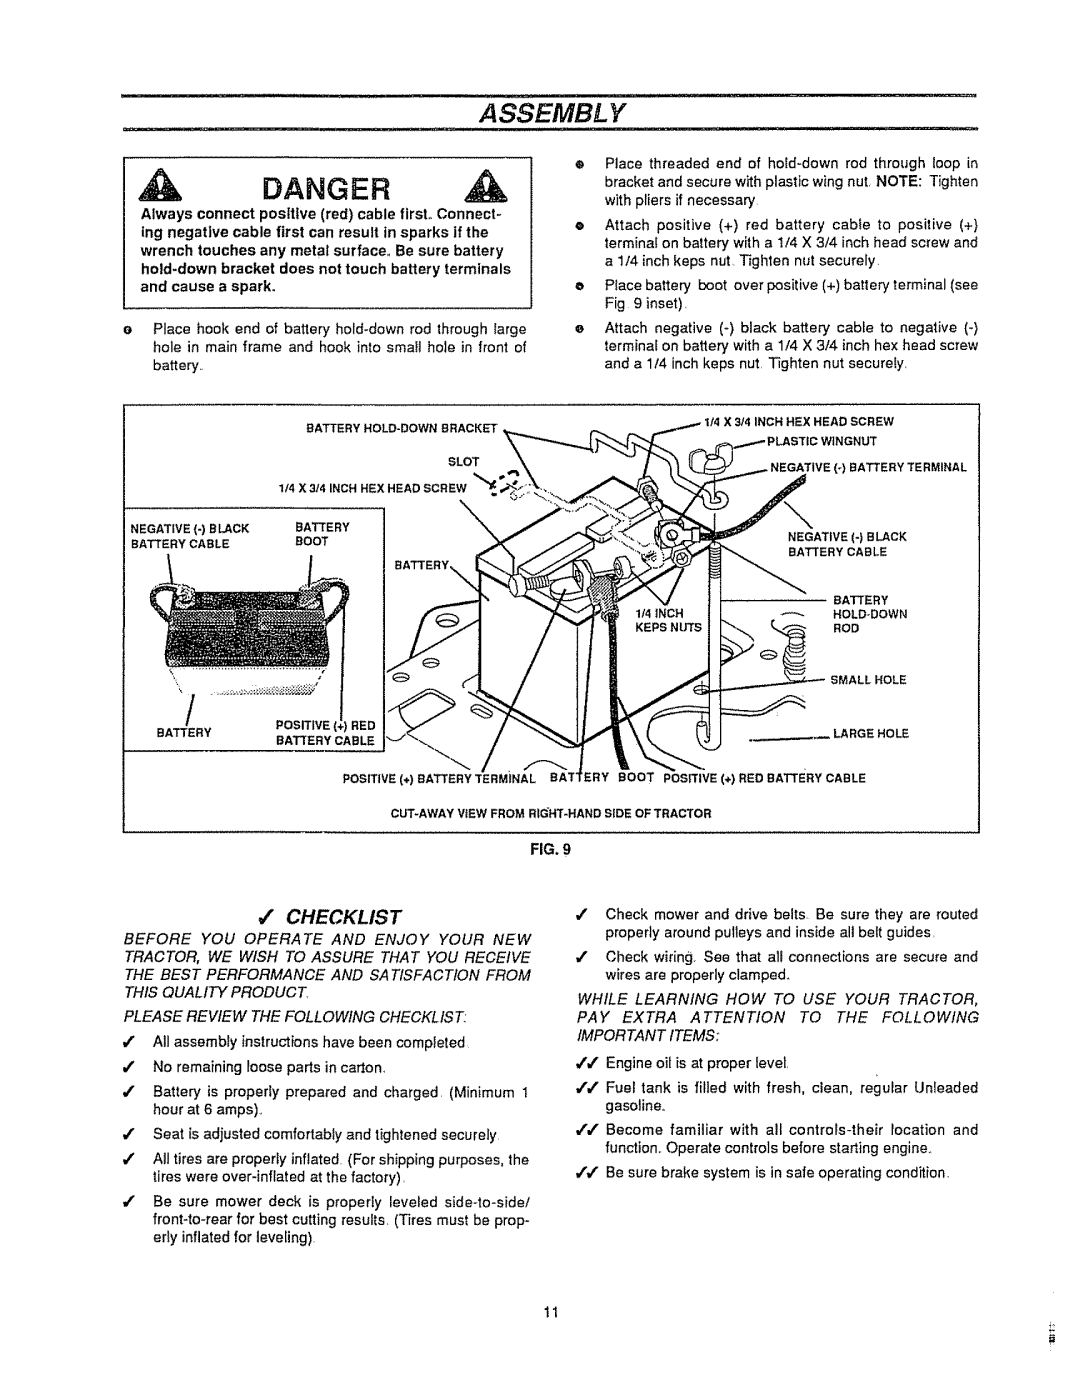 Sears 536.25587 owner manual oo+,+, Assembly, # Checklist, Please Review The Following Checklist 